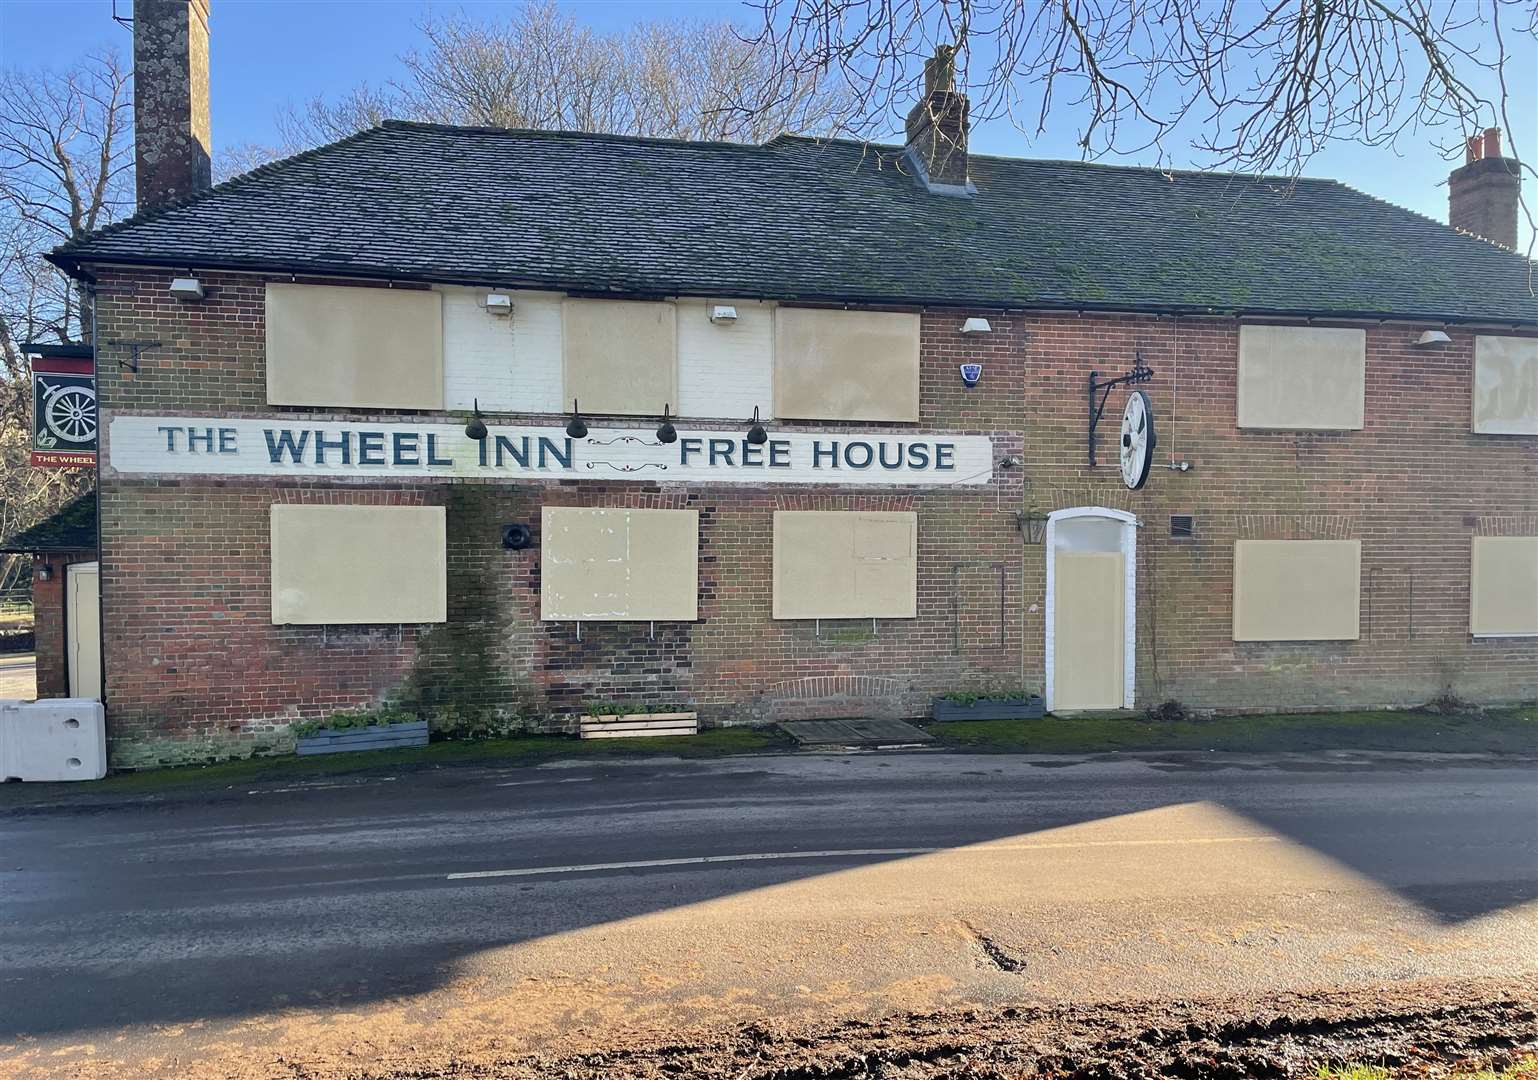 The pub was boarded up last week